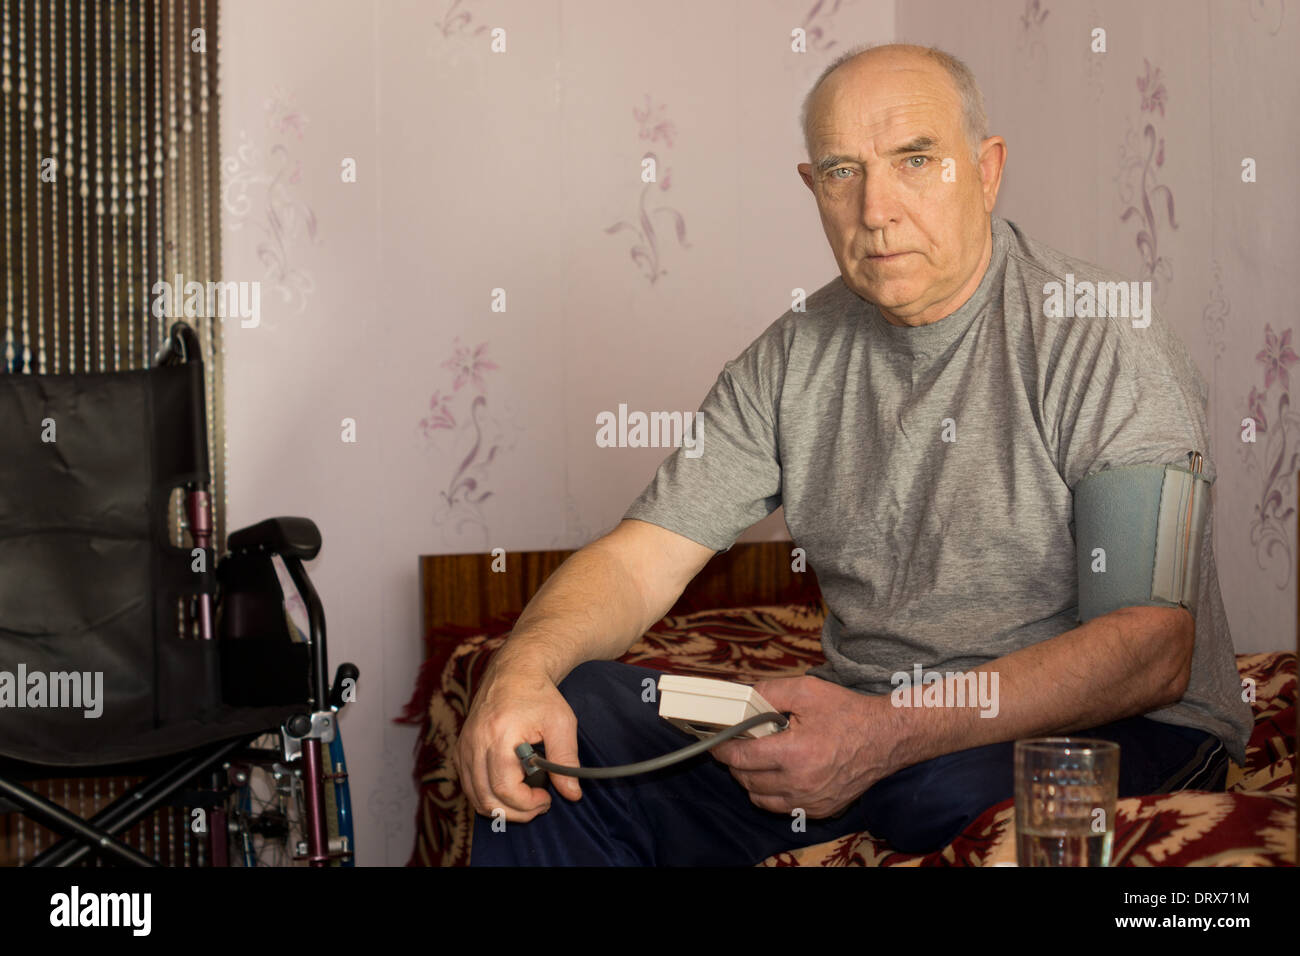 Senior man moniotoring his blood pressure using a pressure cuff and sphygmomanometer sitting on his bead at home Stock Photo